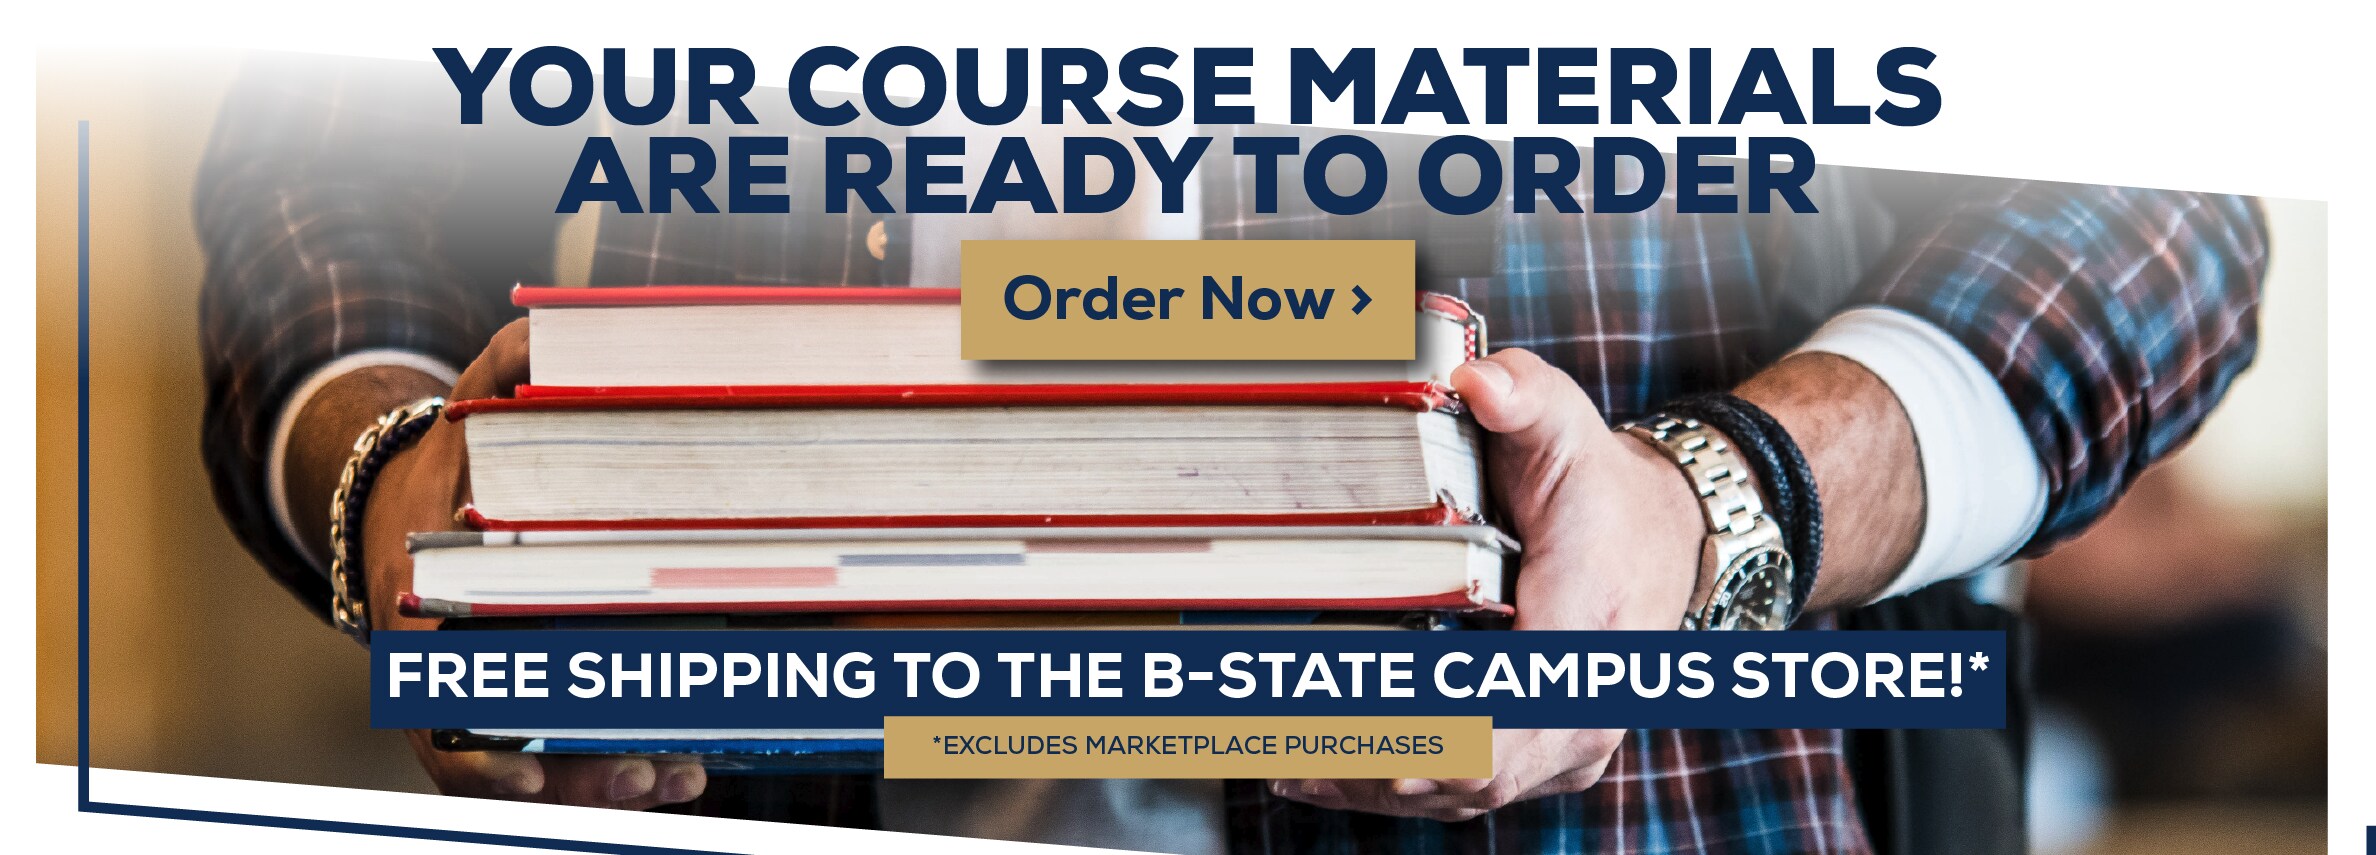 Your Course Materials are Ready to Order. Order Now. Free shipping to the B-State Campus Store! *Excludes marketplace purchases.